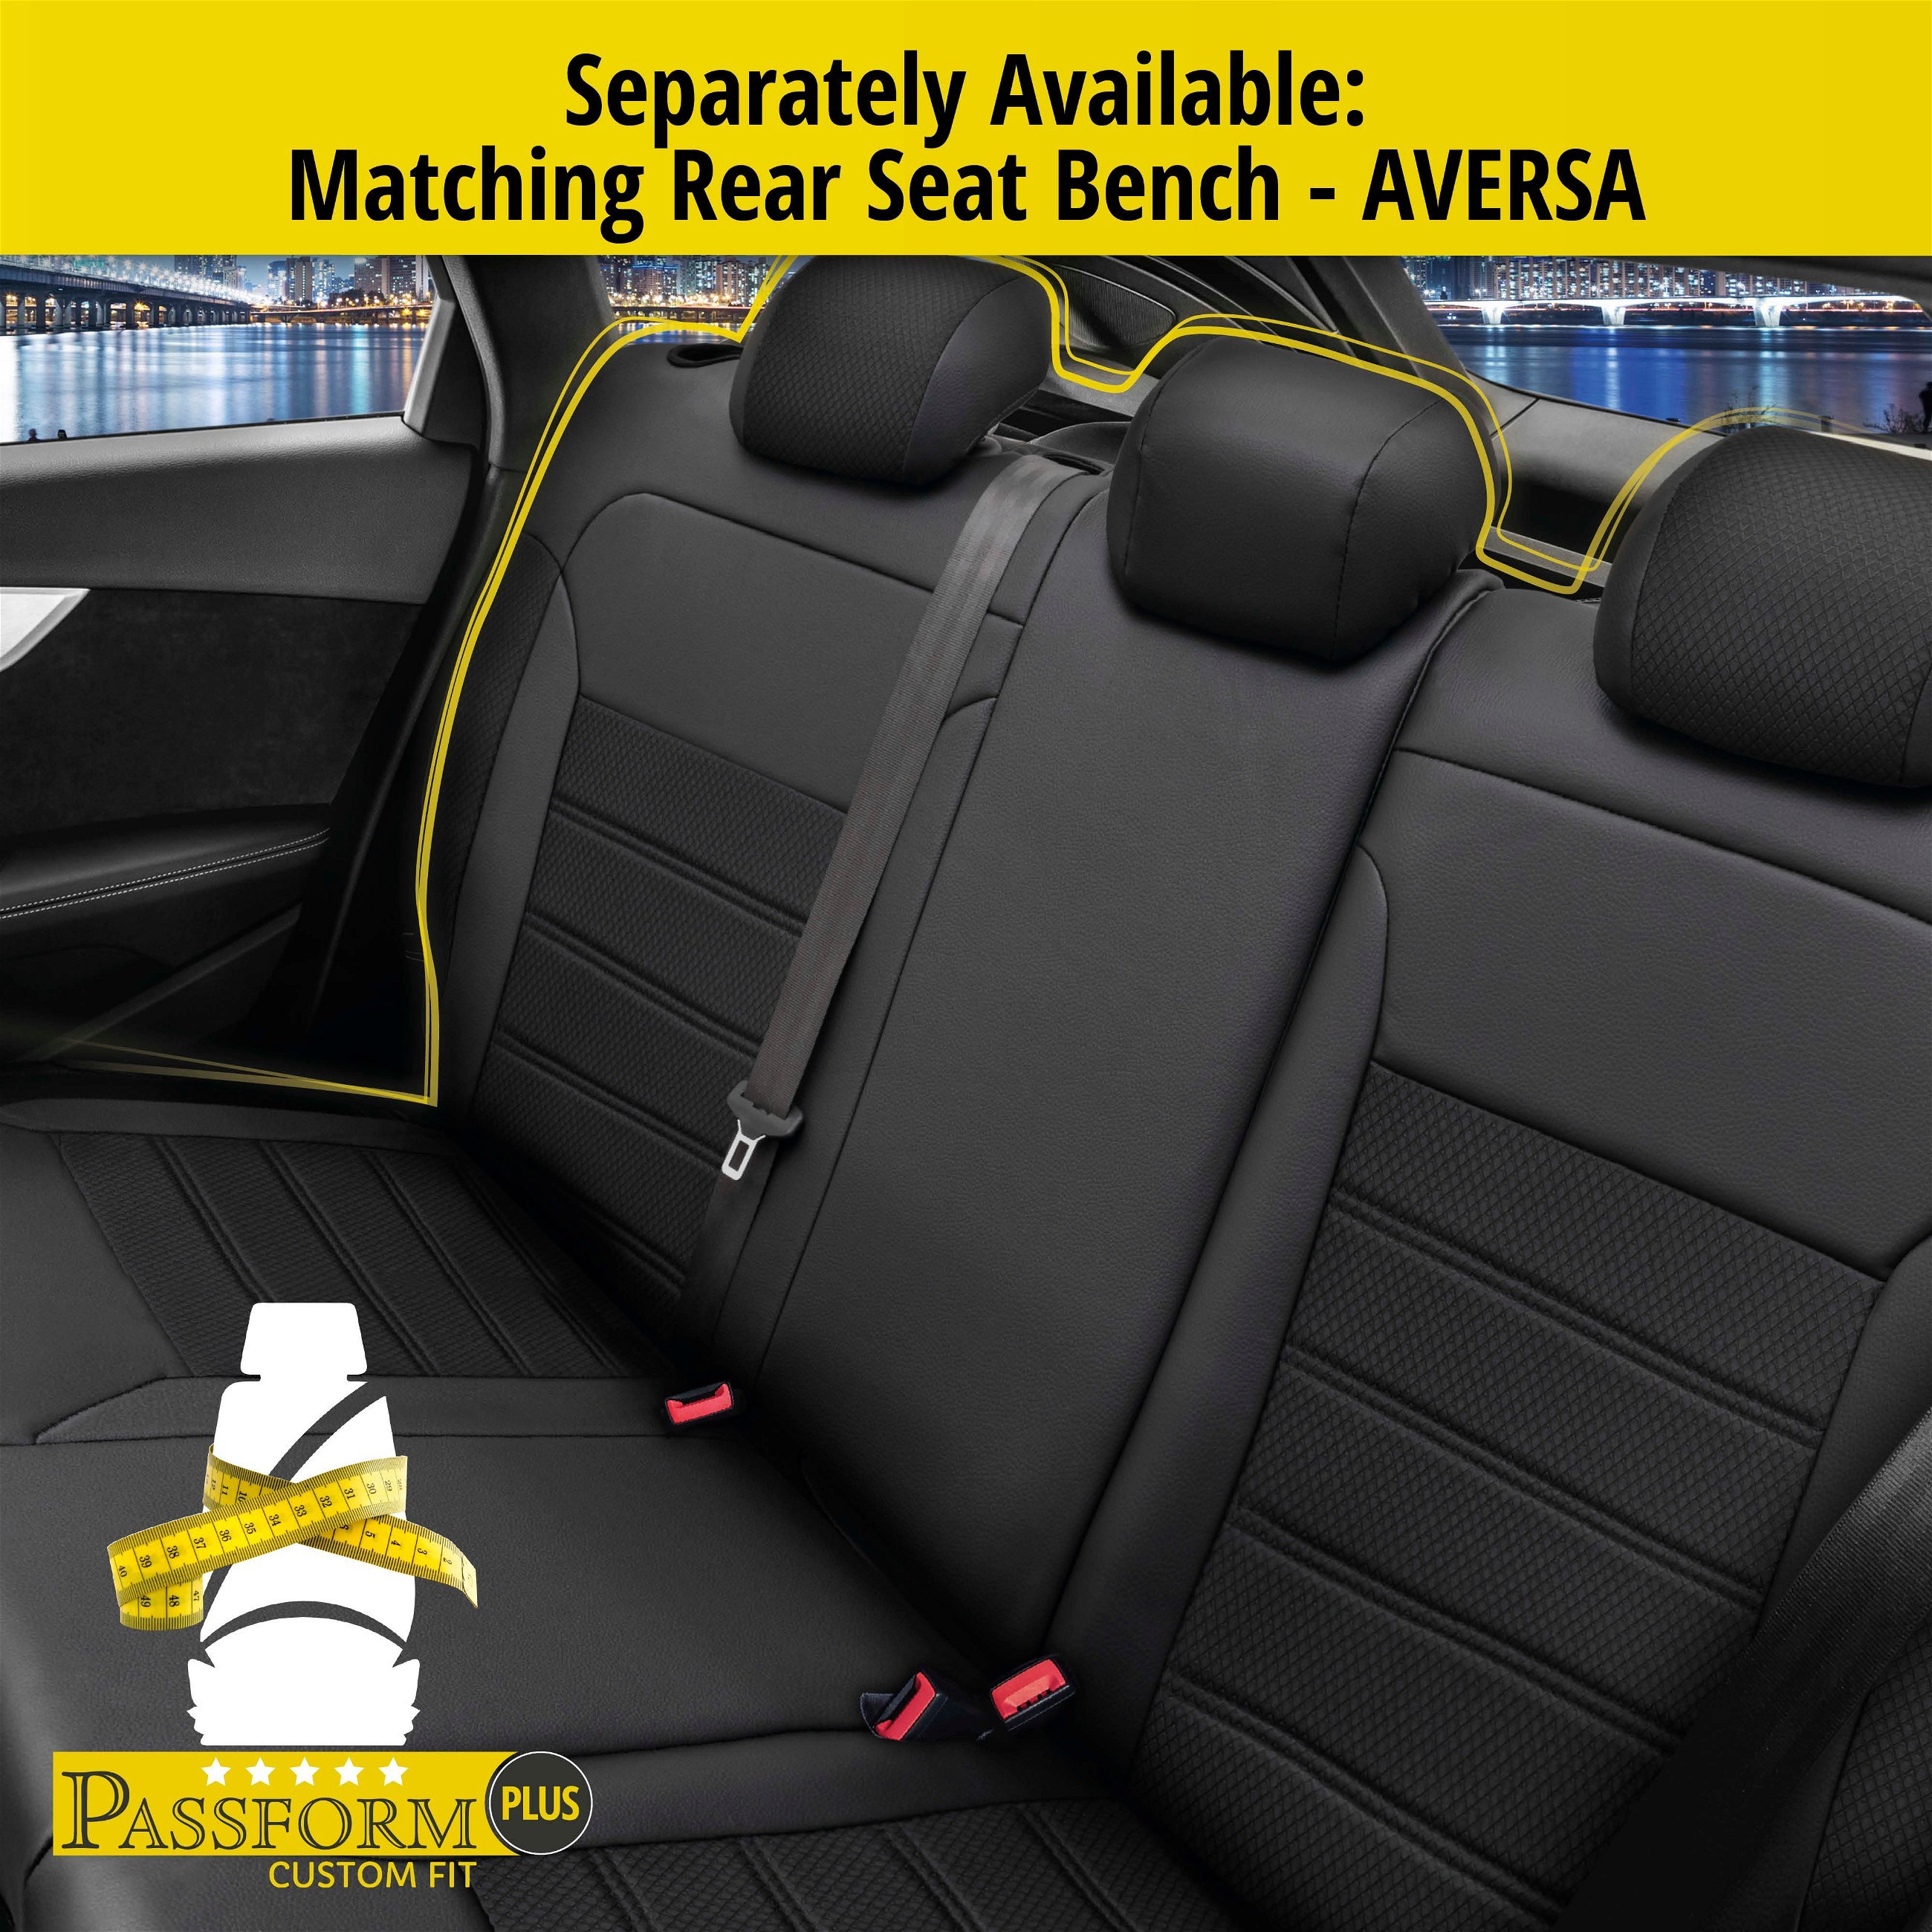 Seat Cover Aversa for Mazda 3 (BM, BN) 07/2013-Today, 2 seat covers for normal seats